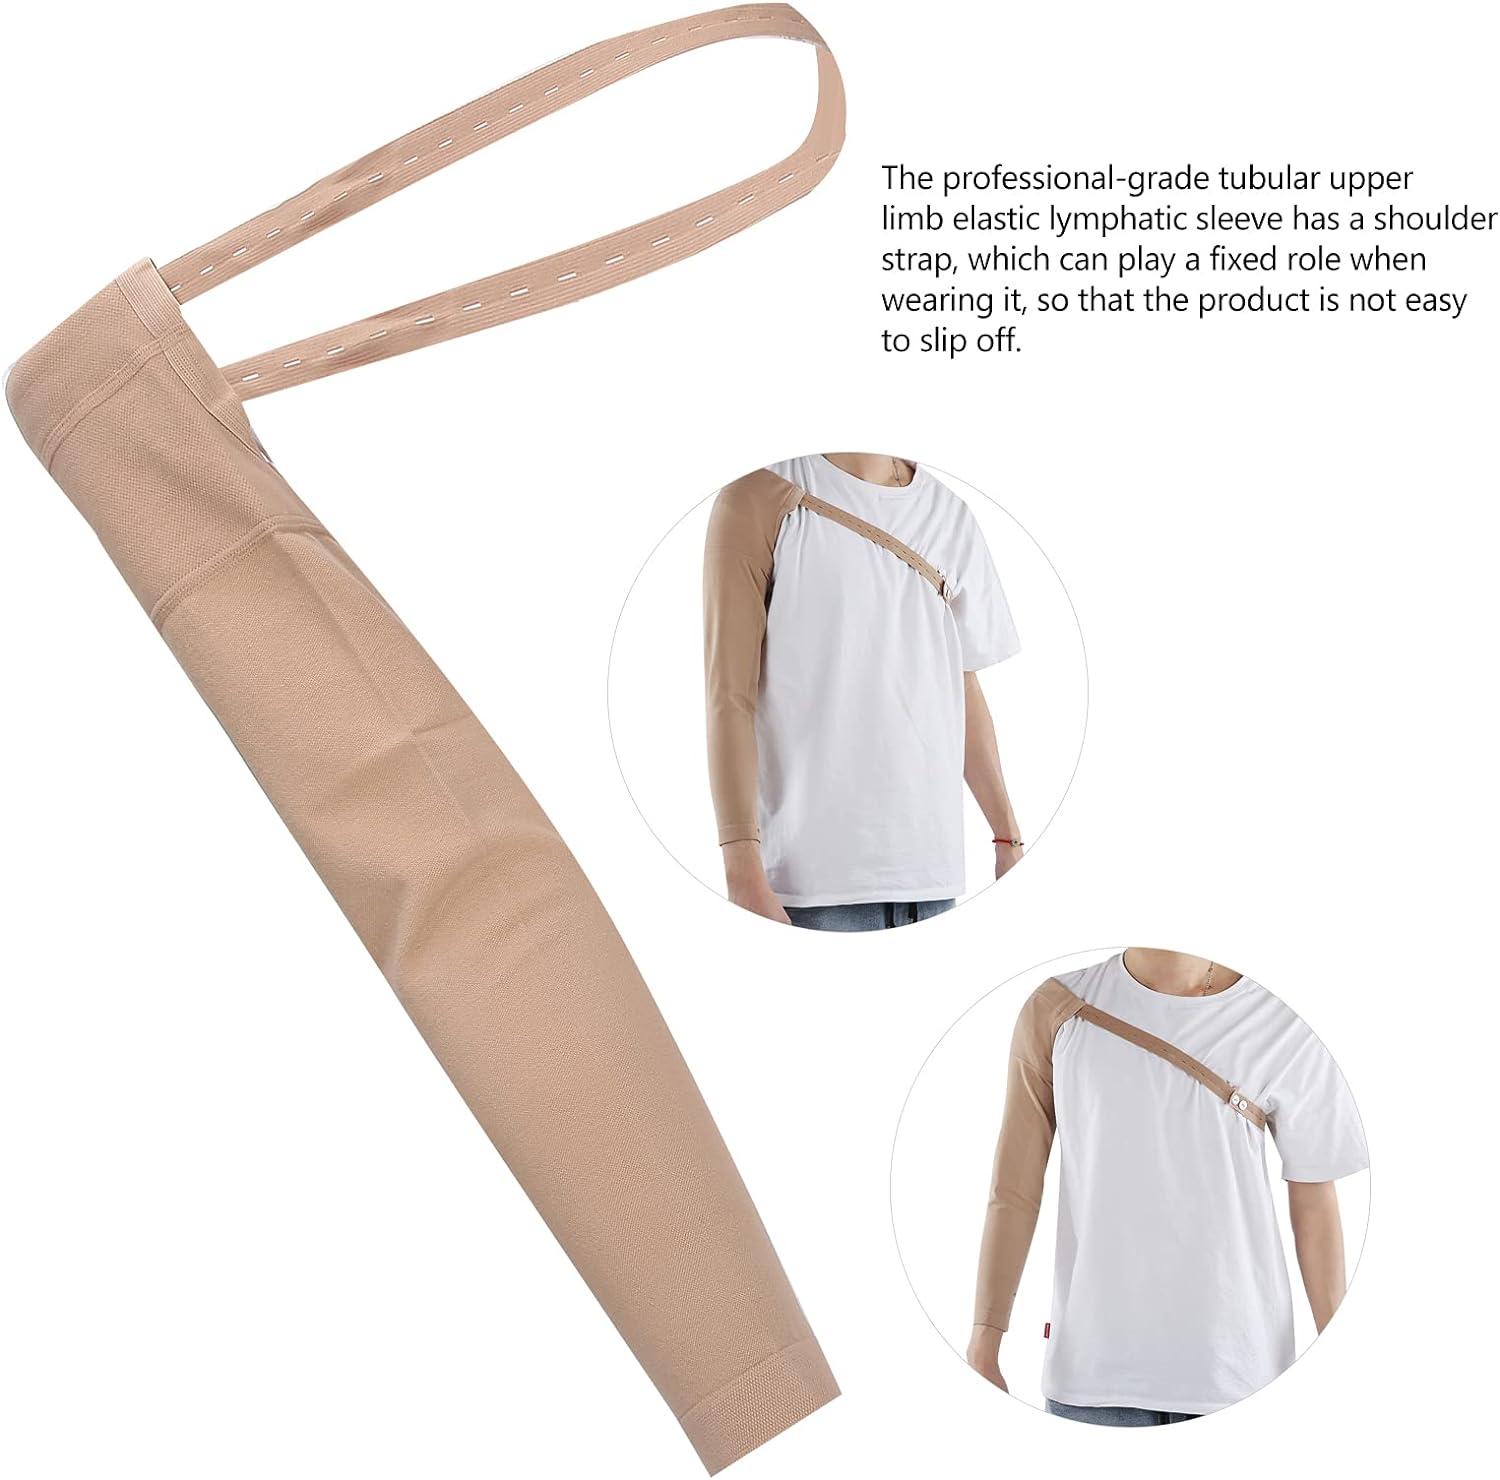 Greensen Post Mastectomy Compression Sleeve Elastic Arm Swelling Lymphedema  Relief Sleeve,Lymphedema Sleeve,Post Mastectomy Arm Sleeve